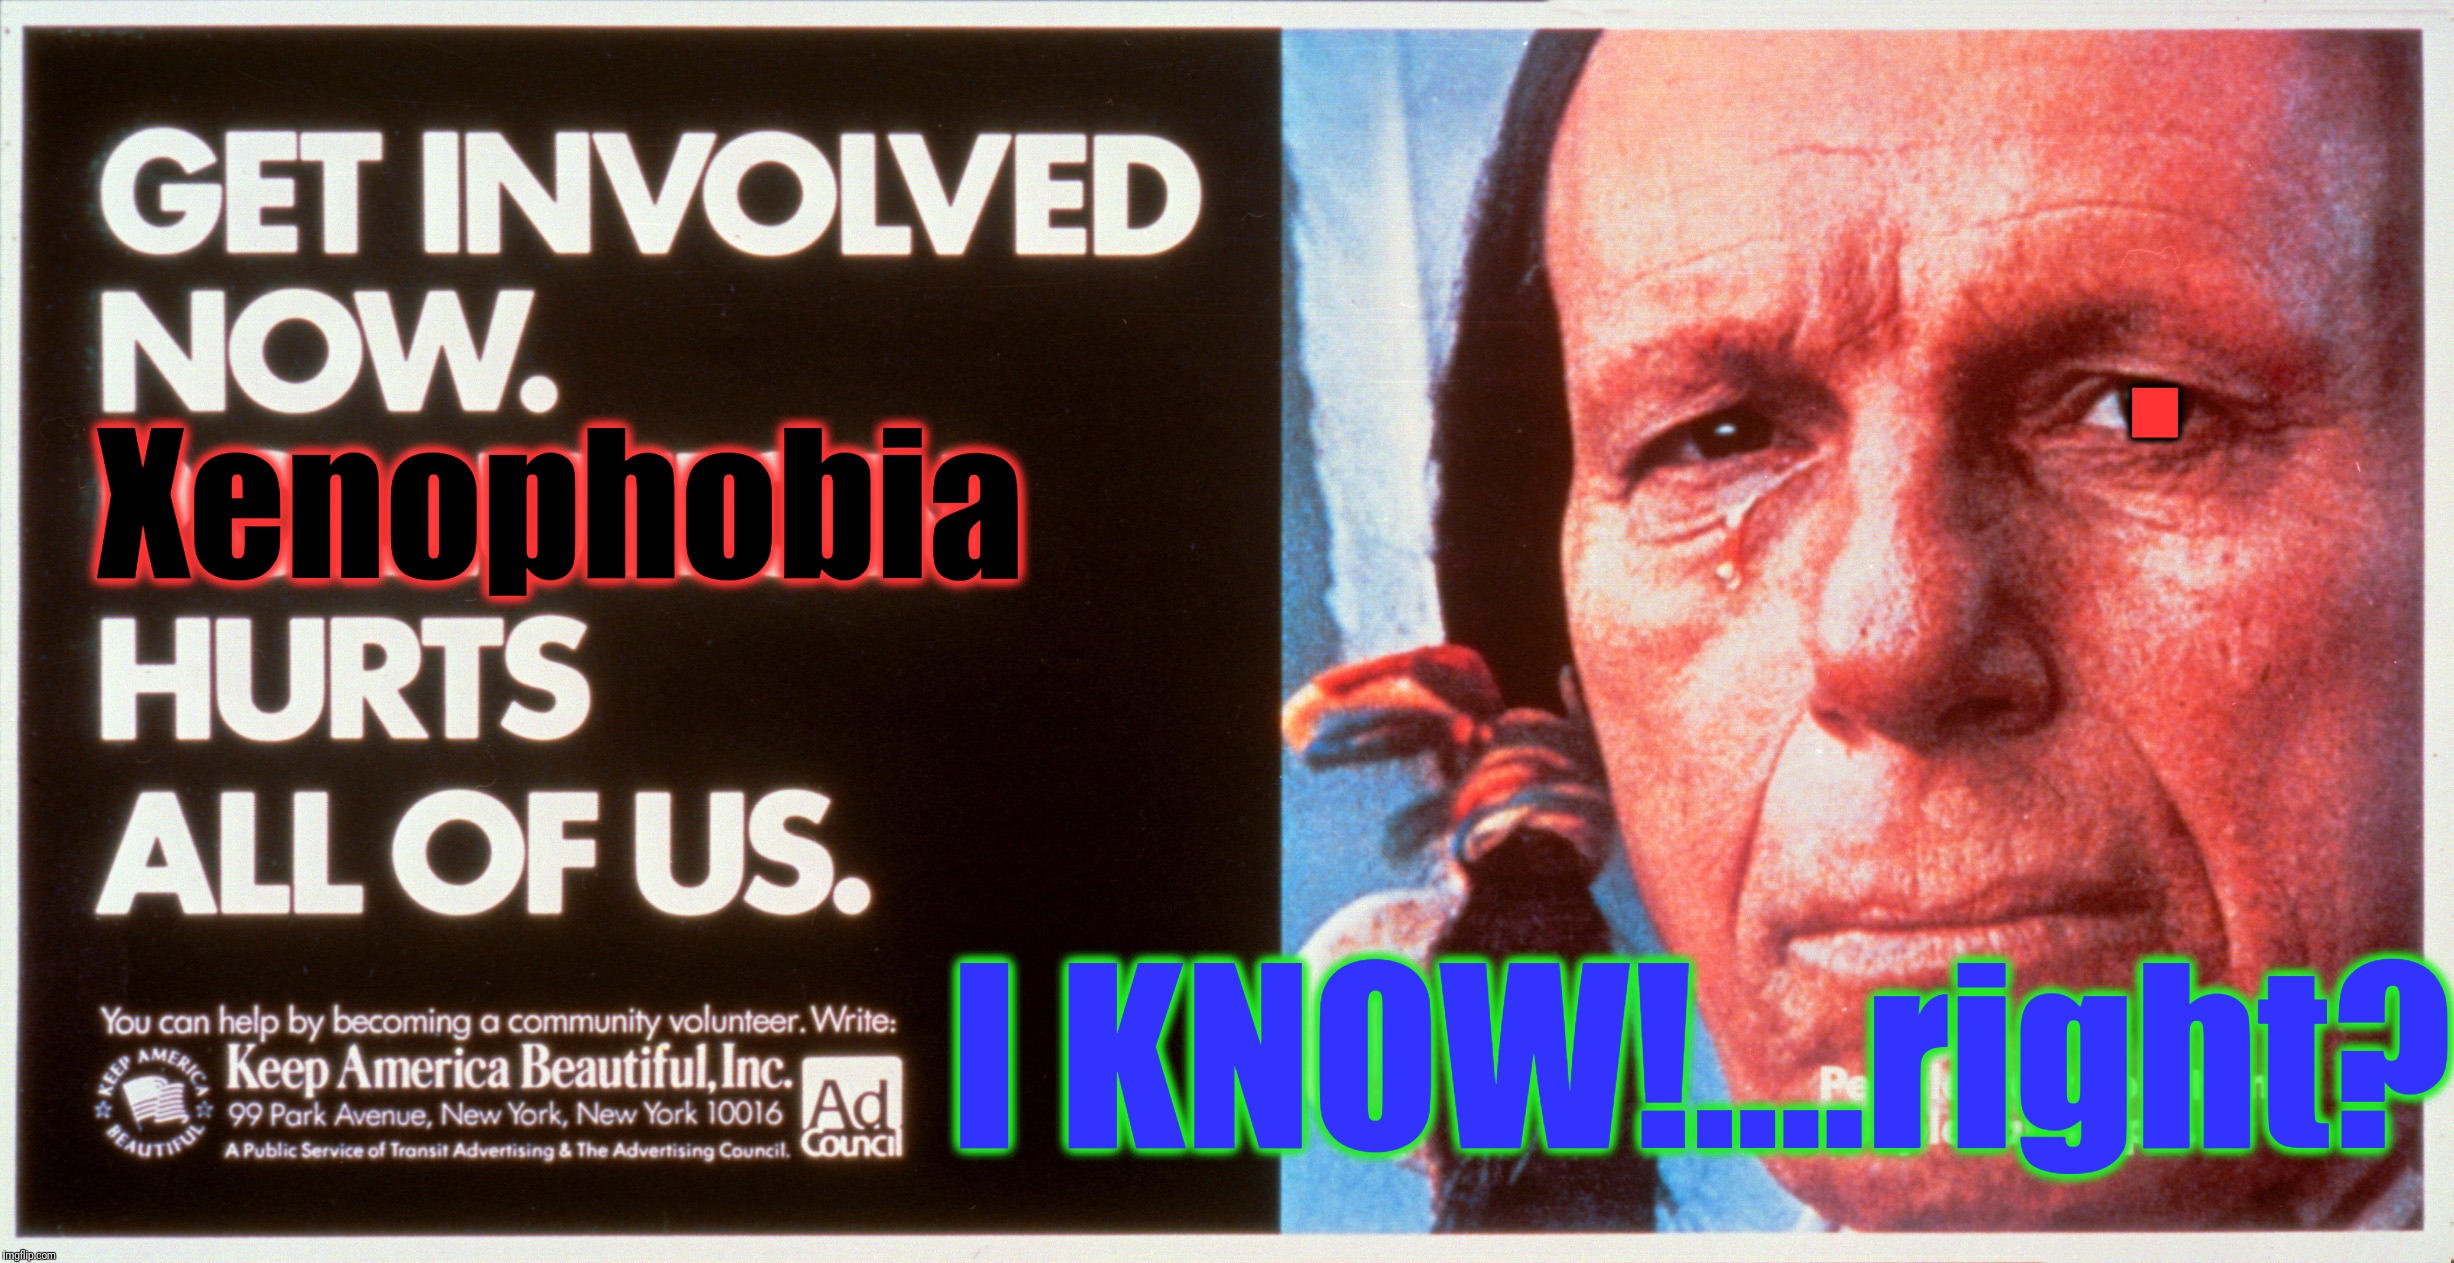 I KNOW!....right? Xenophobia . | made w/ Imgflip meme maker